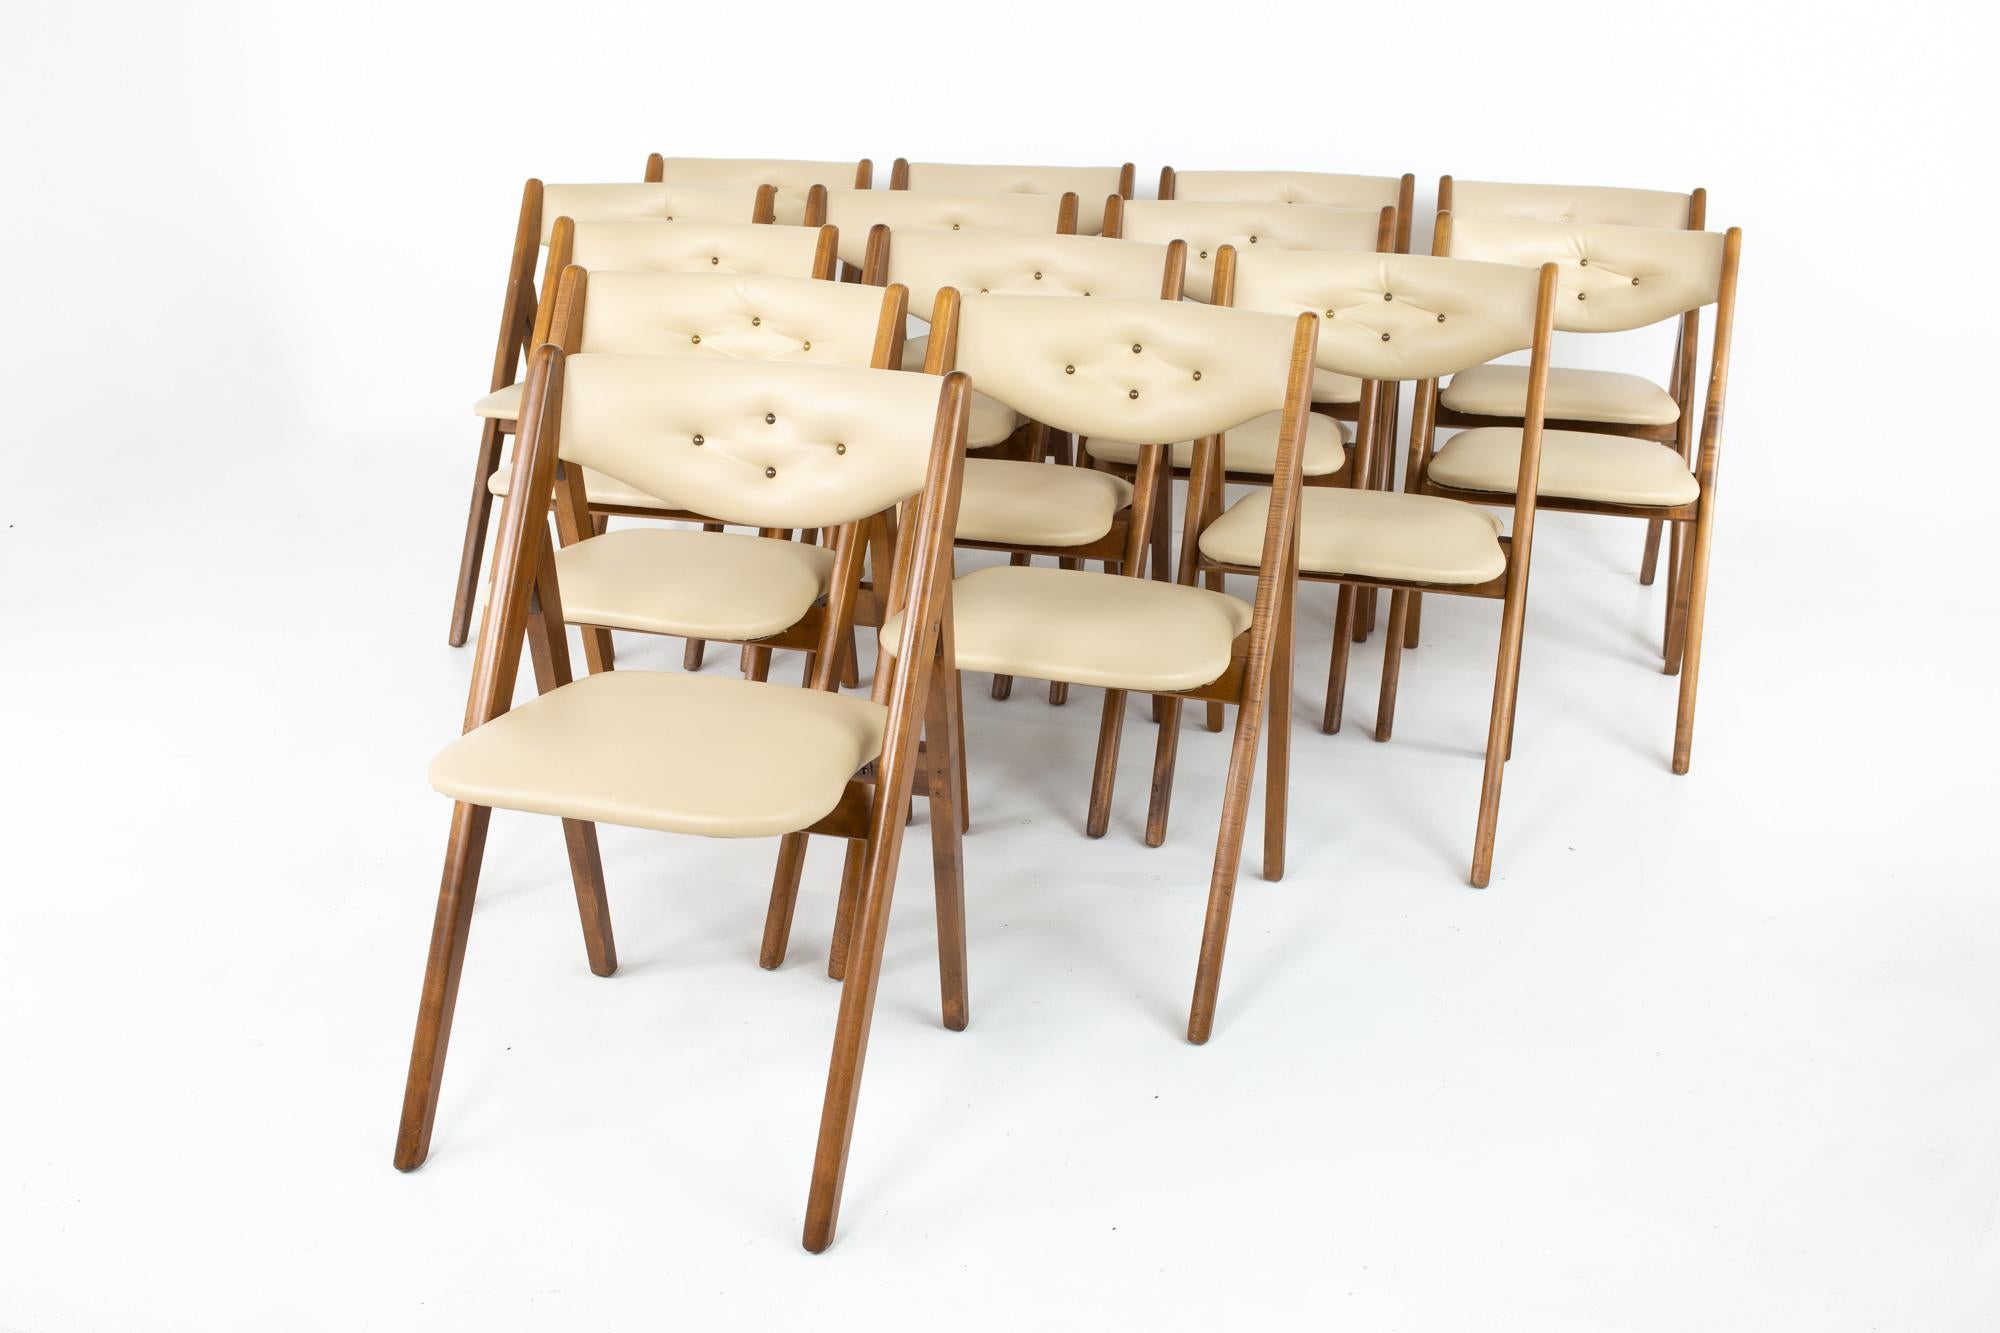 Danish mid century folding dining chairs - set of 14
Each chair measures: 19 wide x 20.5 deep x 30.5 high, with a seat height of 17.5 inches

All pieces of furniture can be had in what we call restored vintage condition. That means the piece is